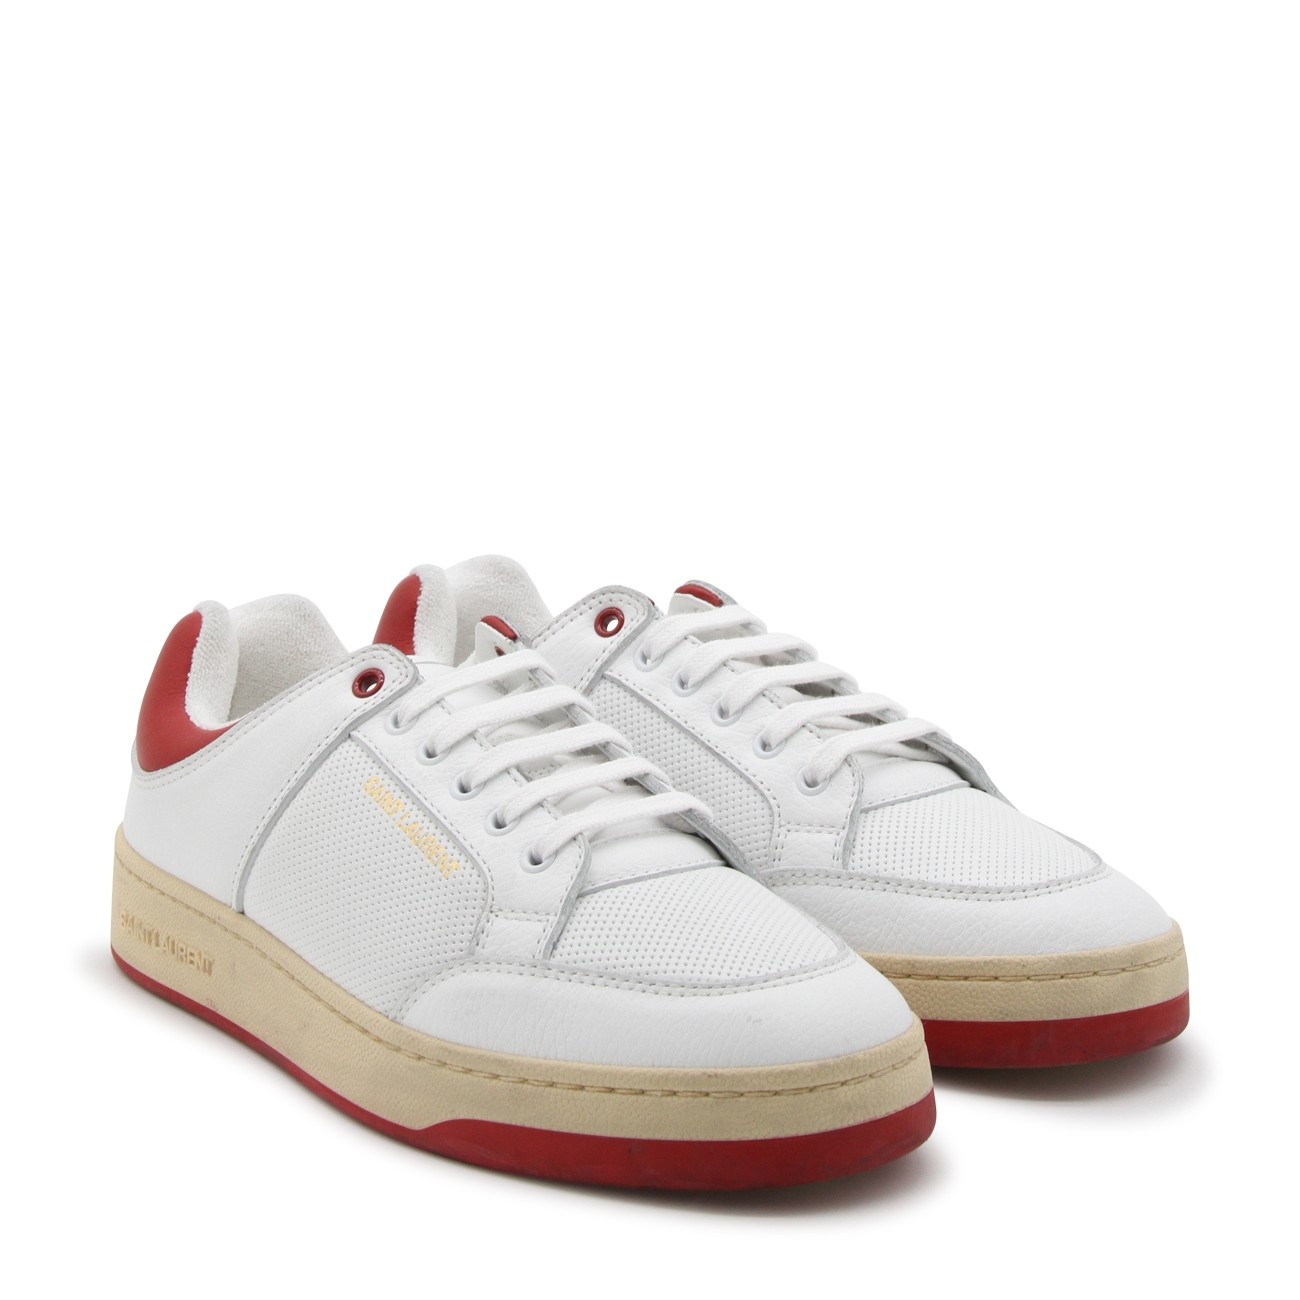 white and red leather sneakers - 2